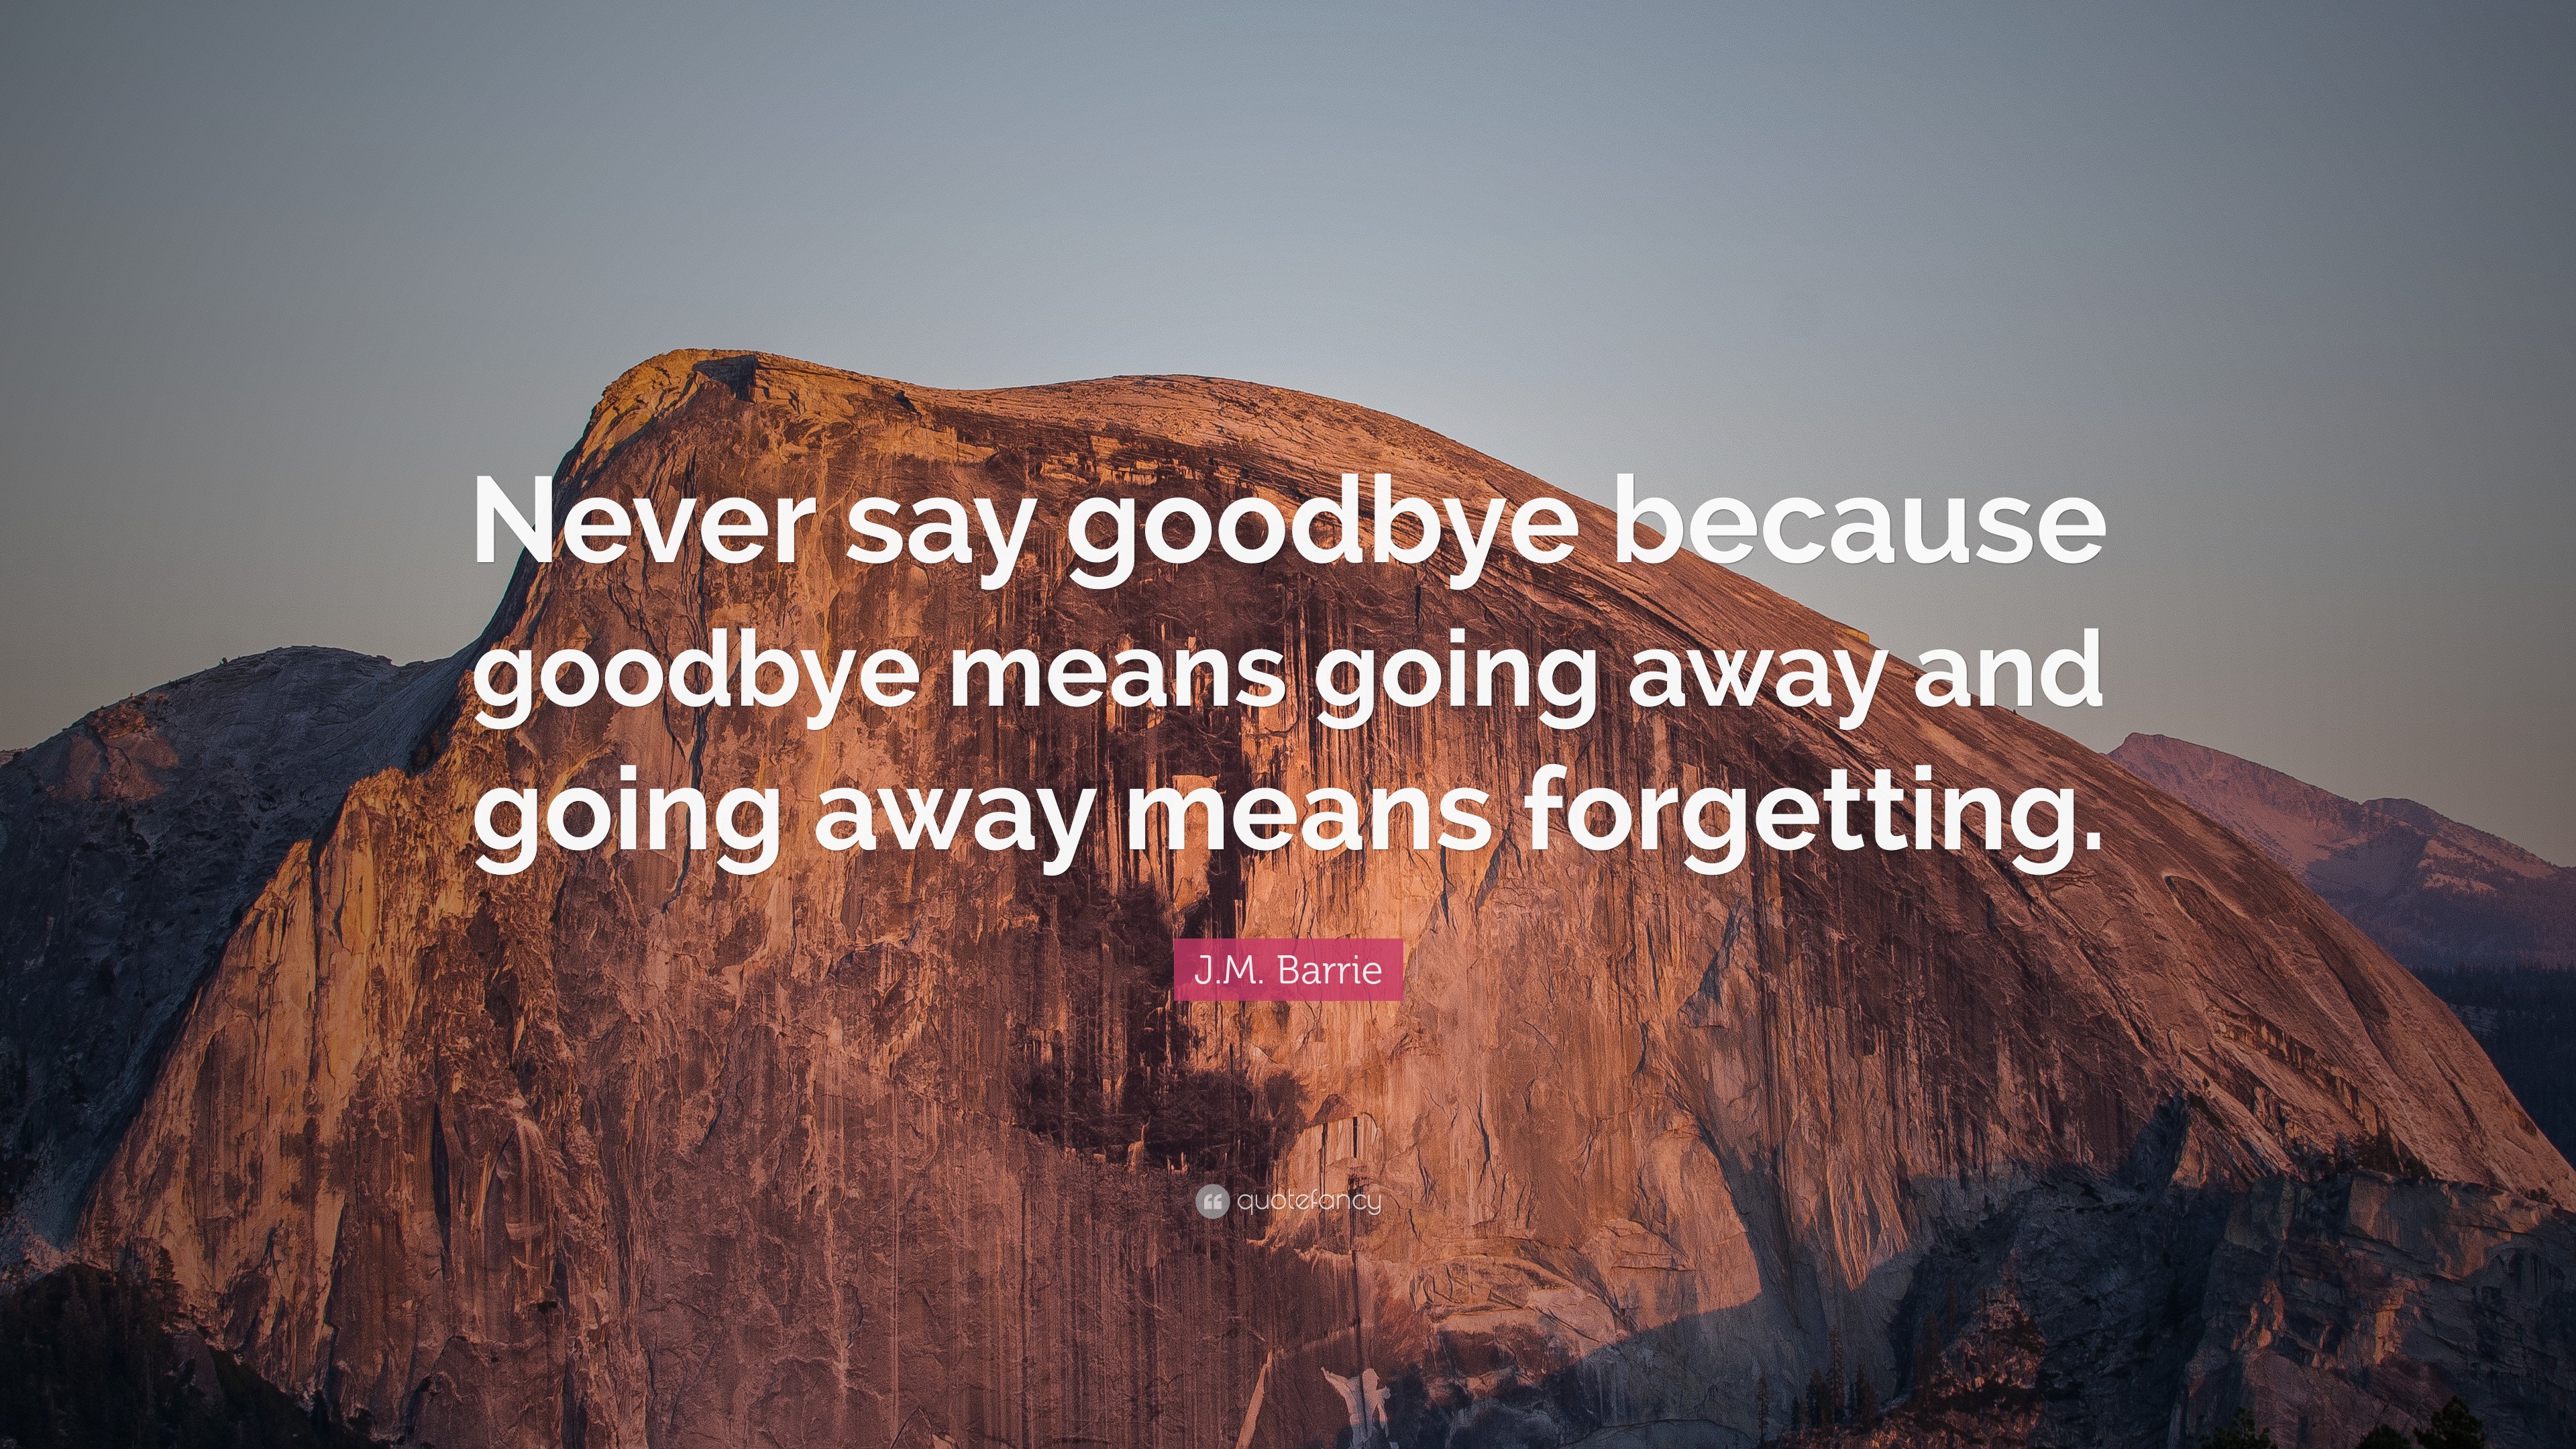 J.M. Barrie Quote: “Never say goodbye because goodbye means going away